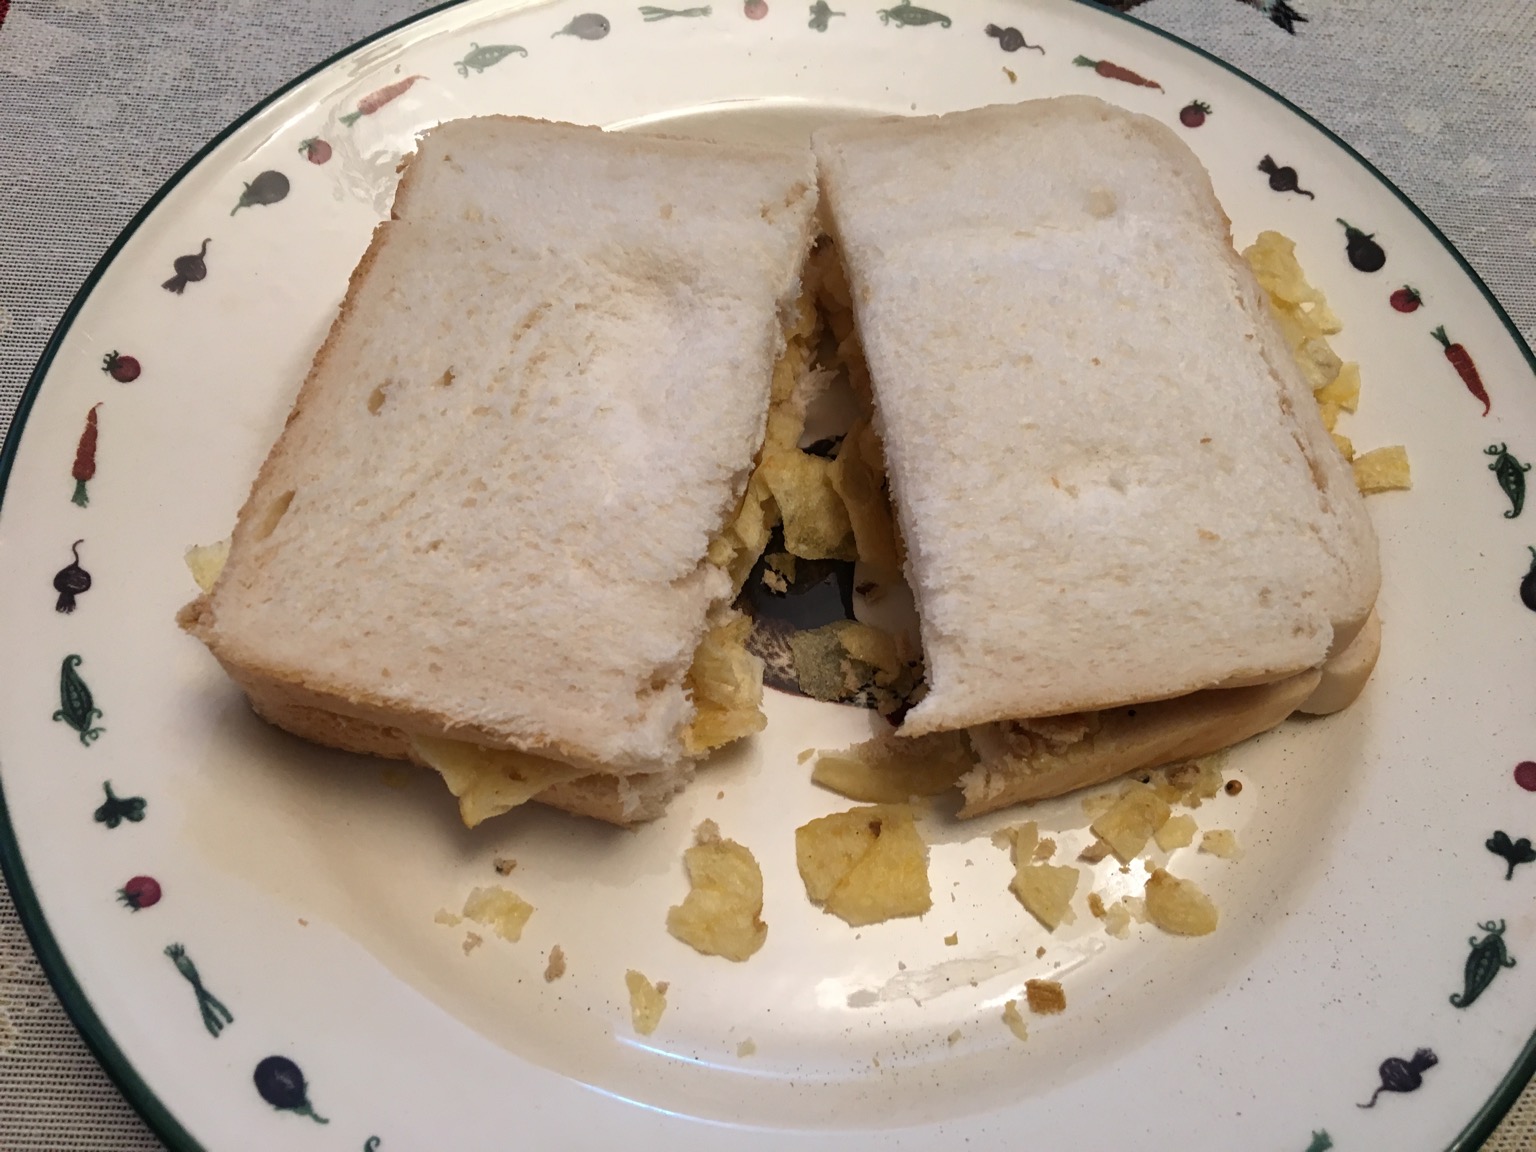 Sliced white bread containing crisps and cut in half